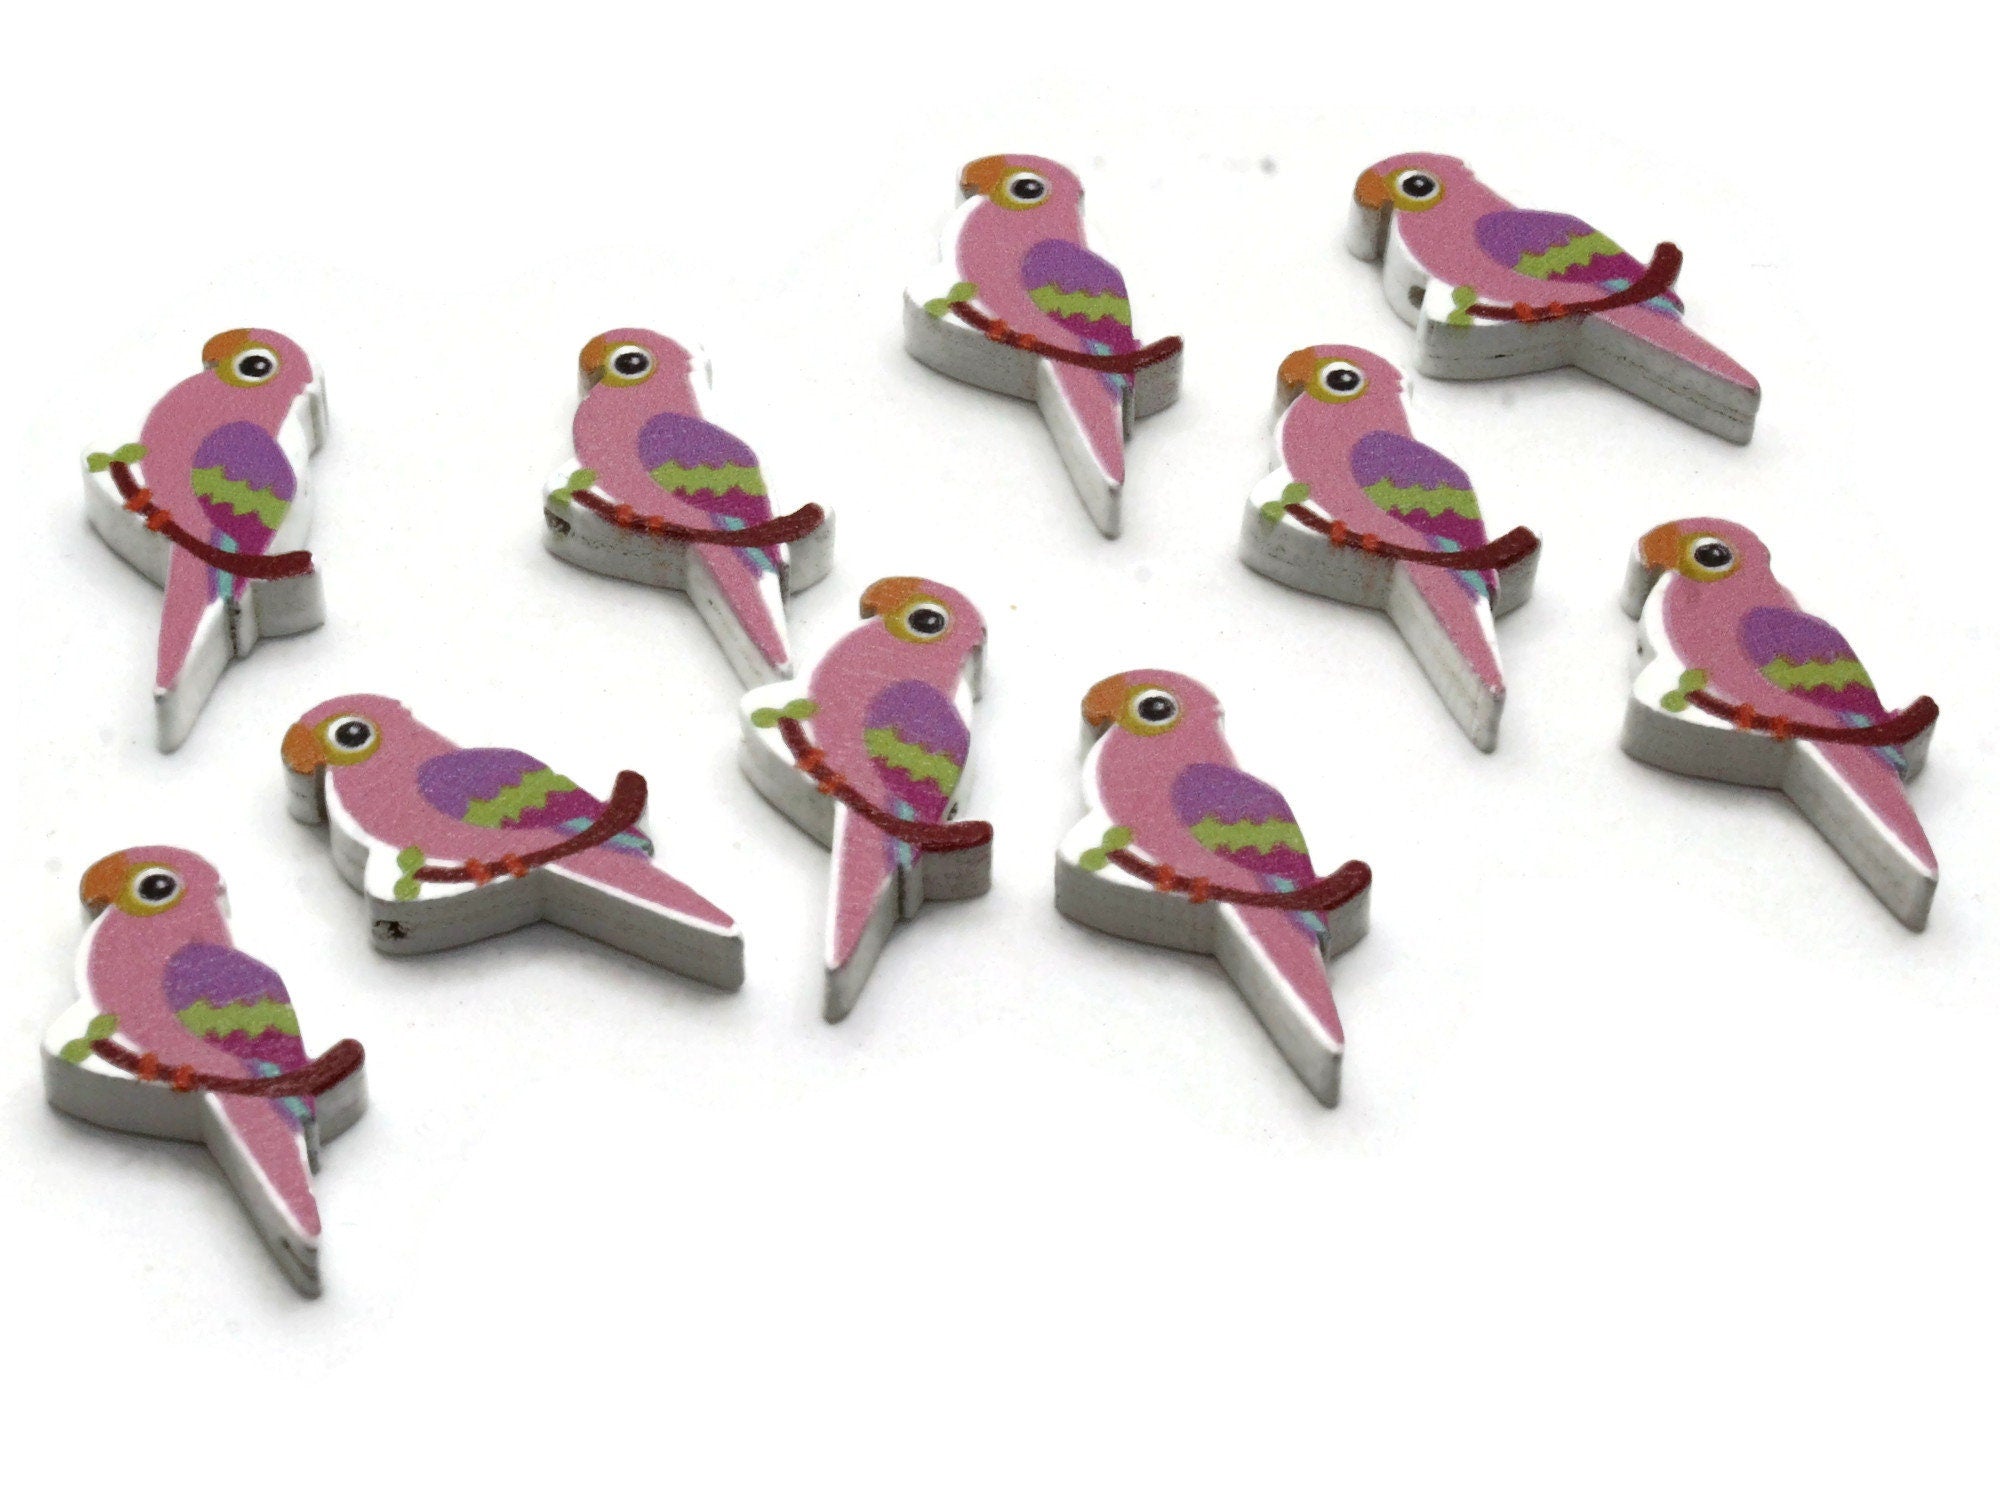 12 22mm Purple Wooden Owl Beads Wood Animal Beads Cute Bird Beads Novelty Beads to String by Smileyboy | Michaels